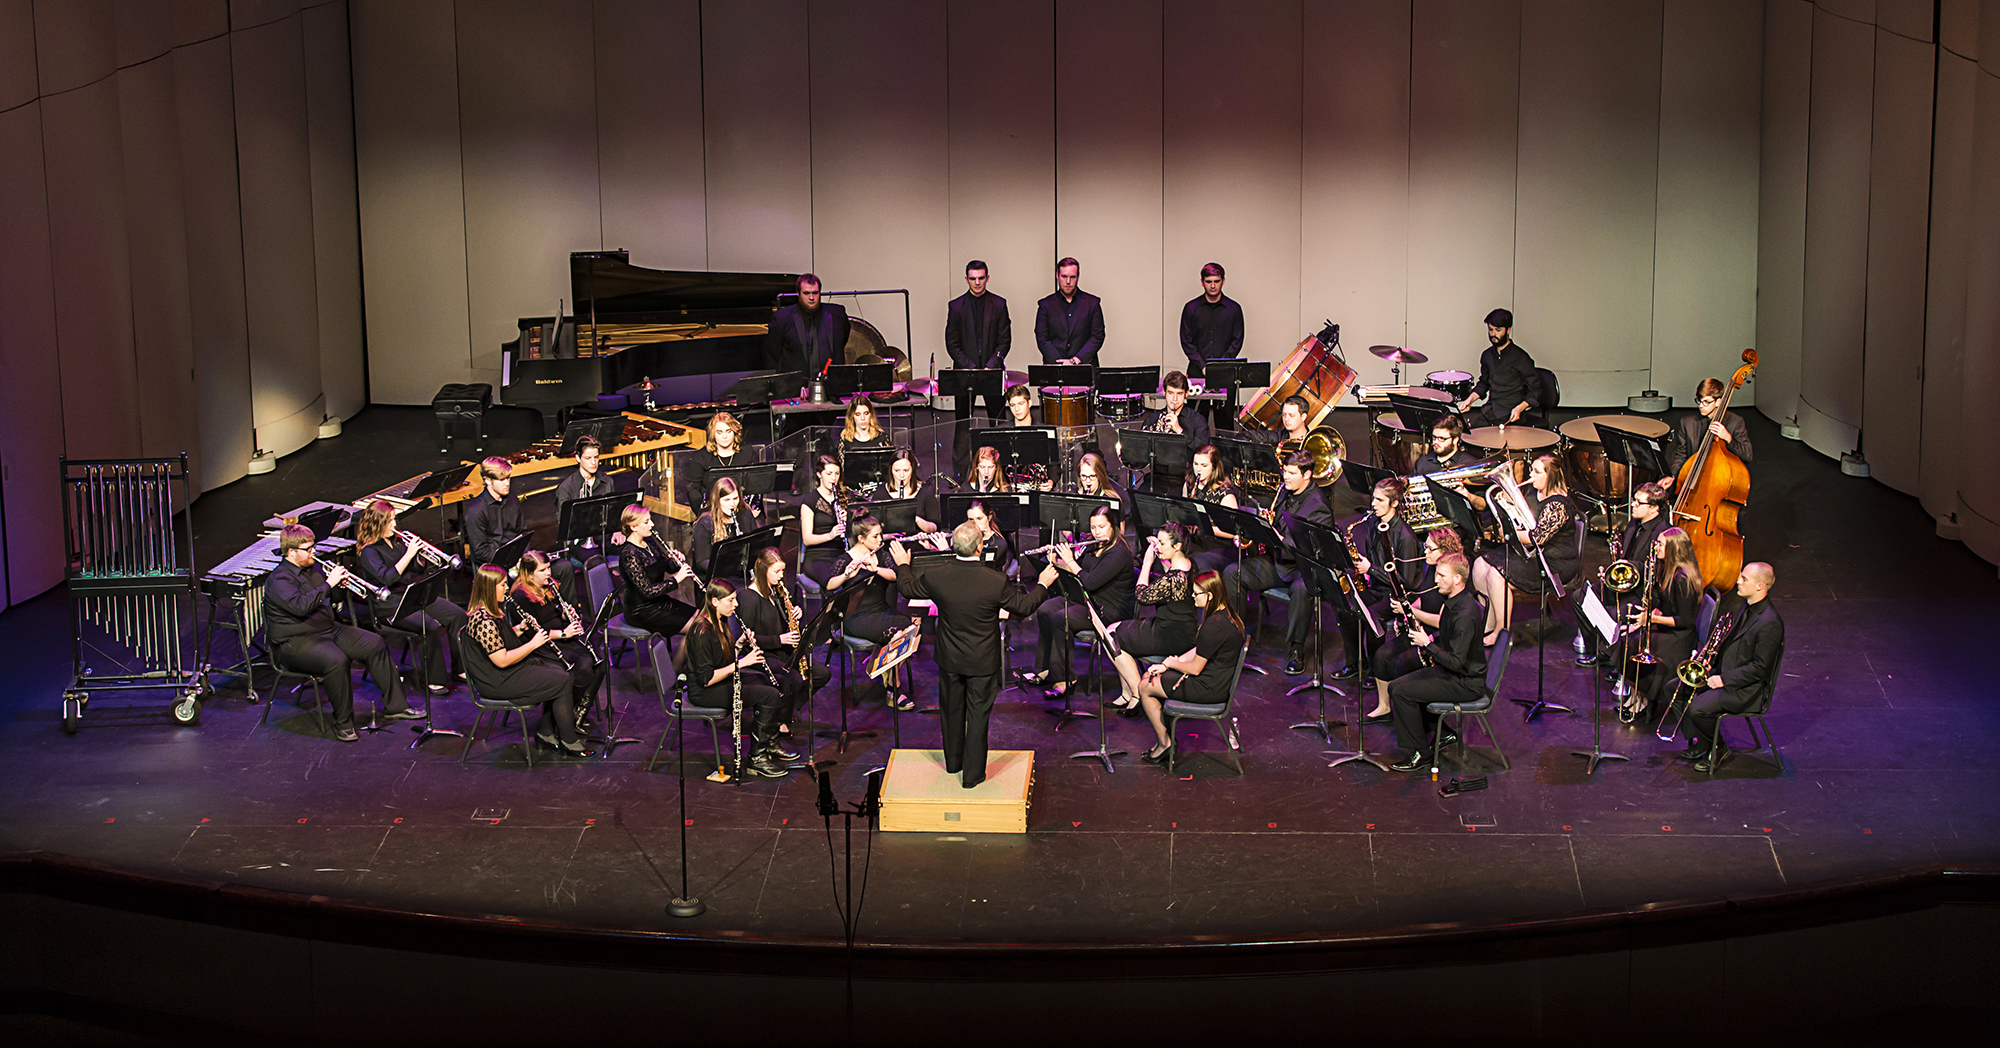 Ouachita to hold Symphonic Band concert on March 7.